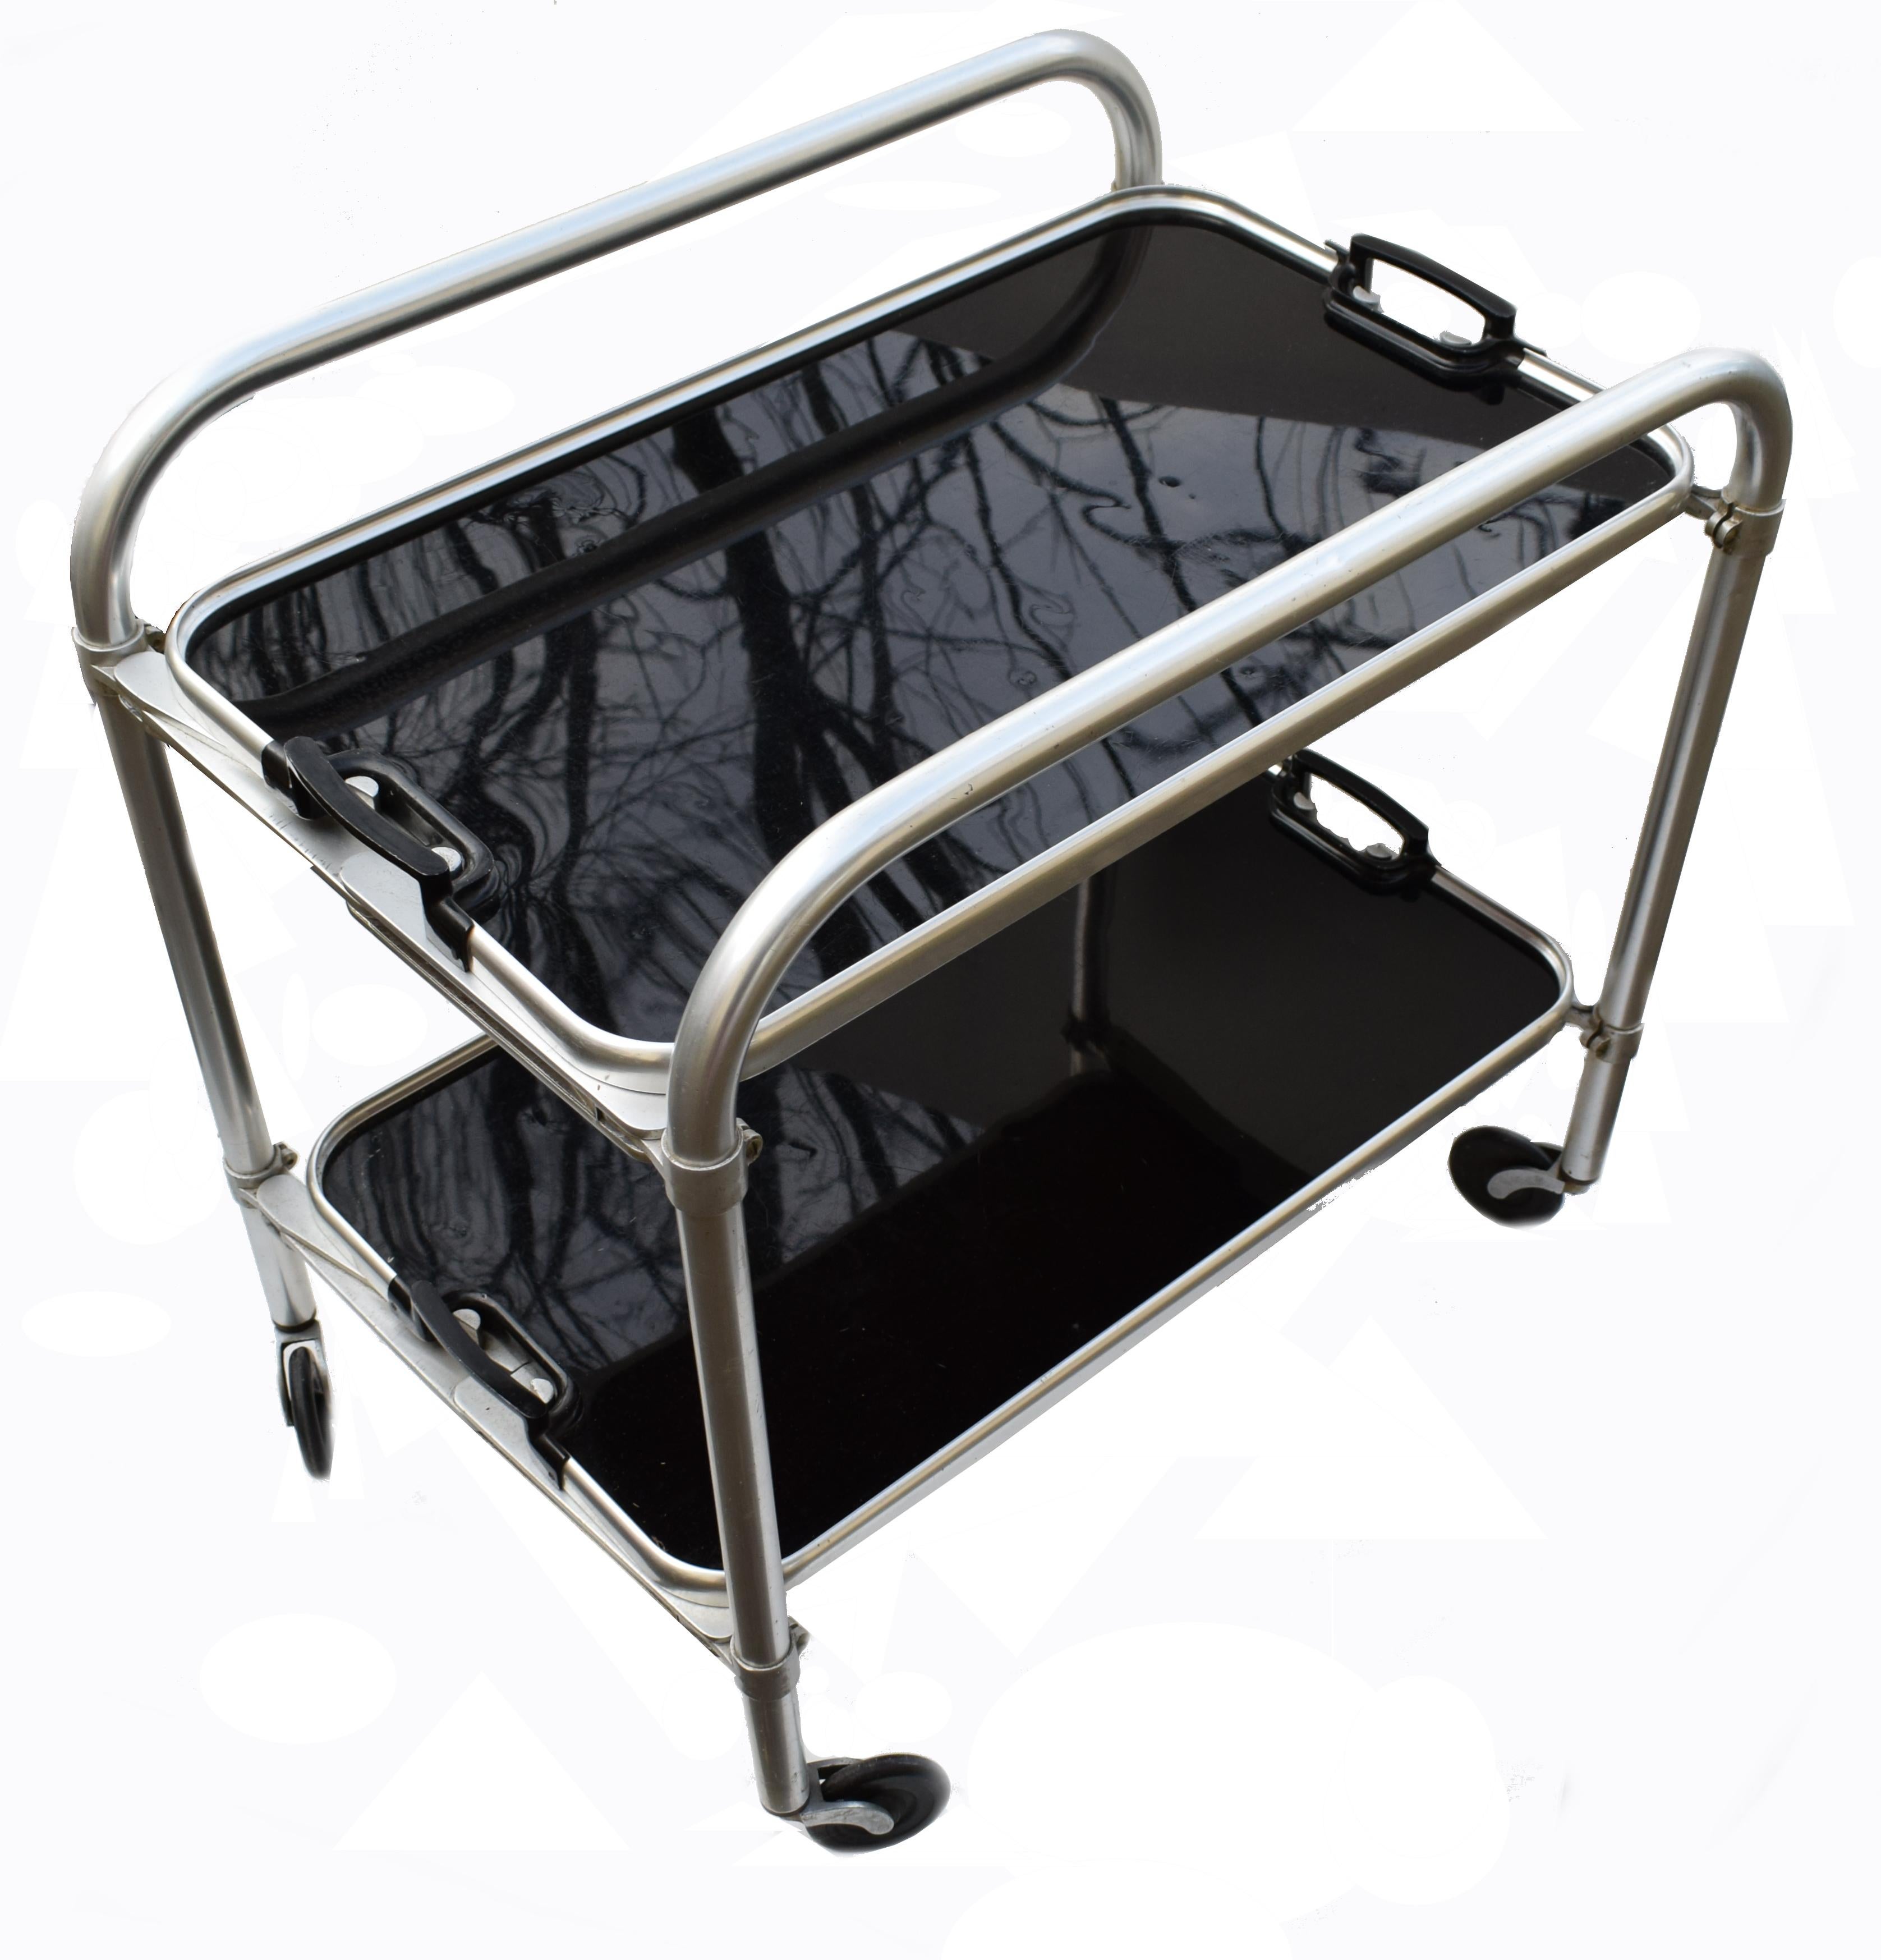 Stylish English two-tier Art Deco aluminium and drinks hostess trolley bar cart. Dating to the 1930s and If glam is your thing then this is for you! In situ these carts look nothing less than superb. Can be used for serving or just displaying your